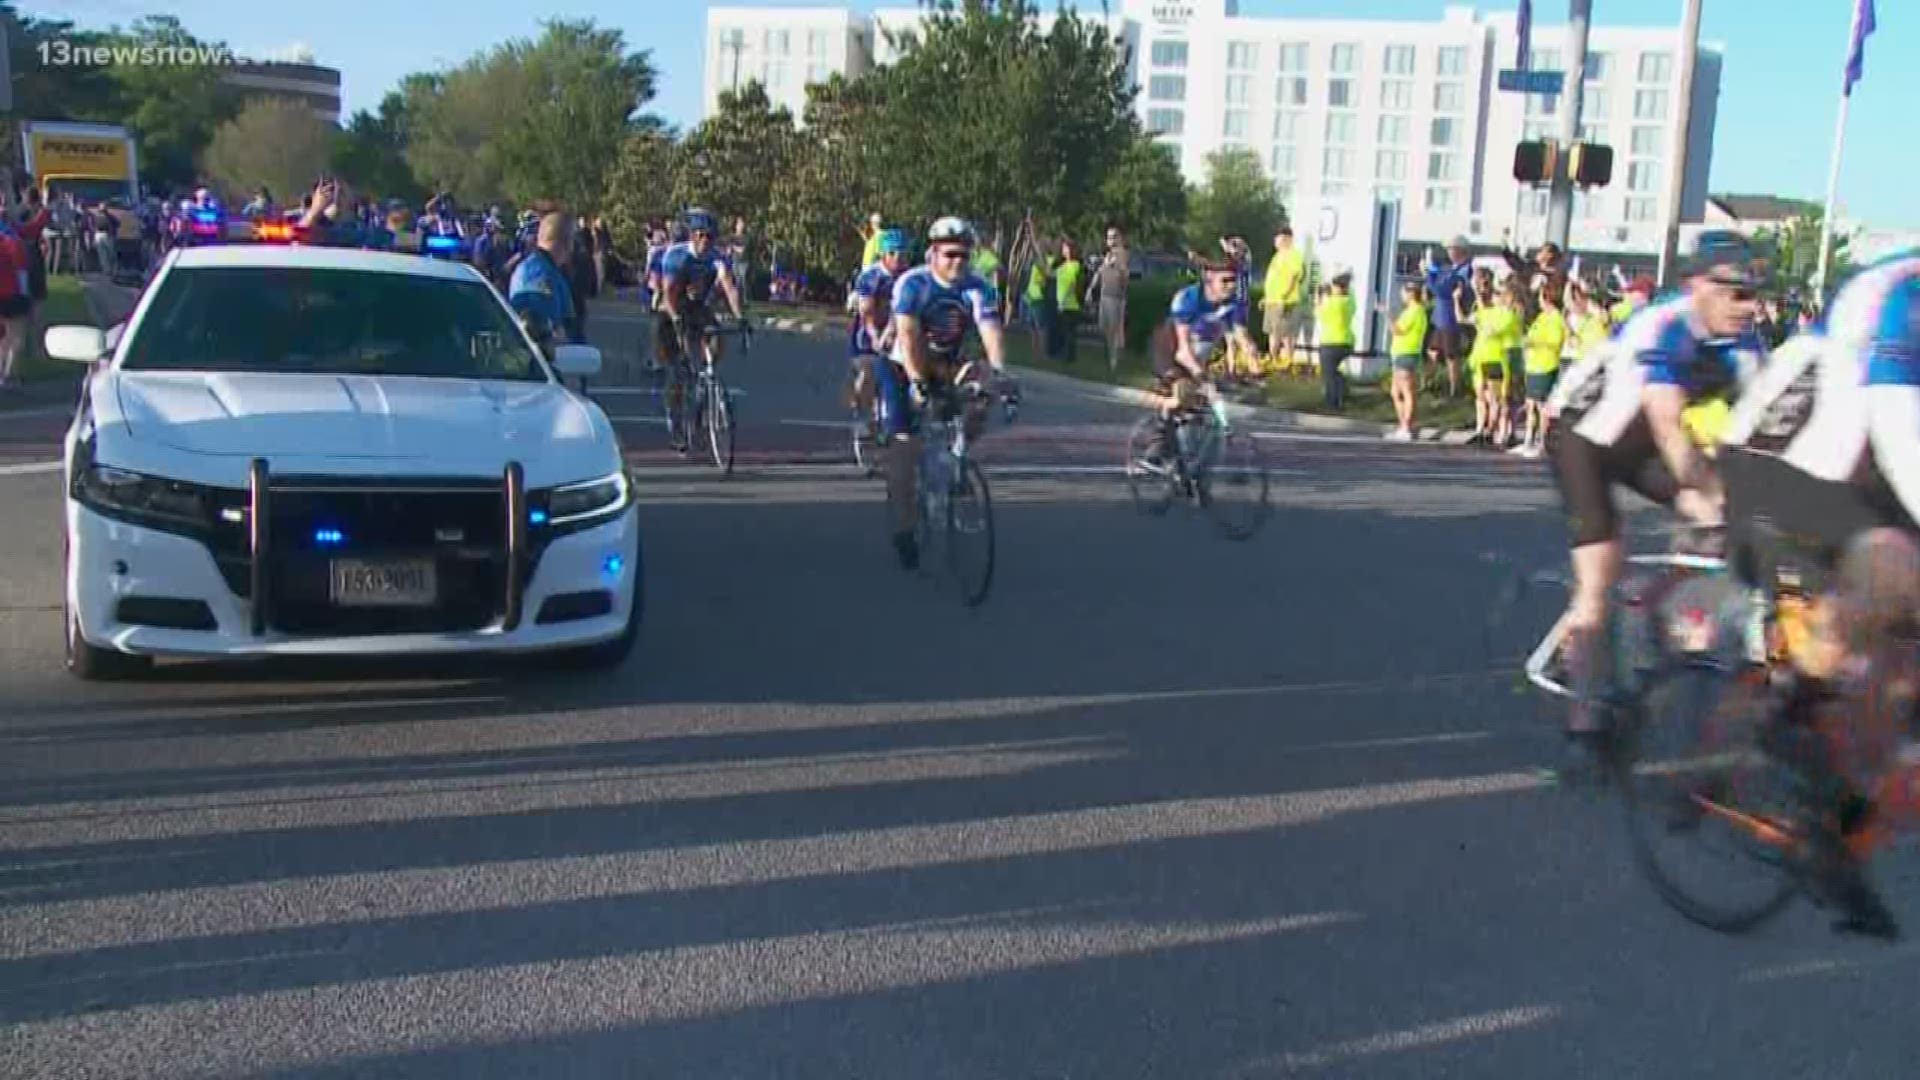 Close to 500 law enforcement members are biking from Chesapeake to D.C. to honor the fallen.